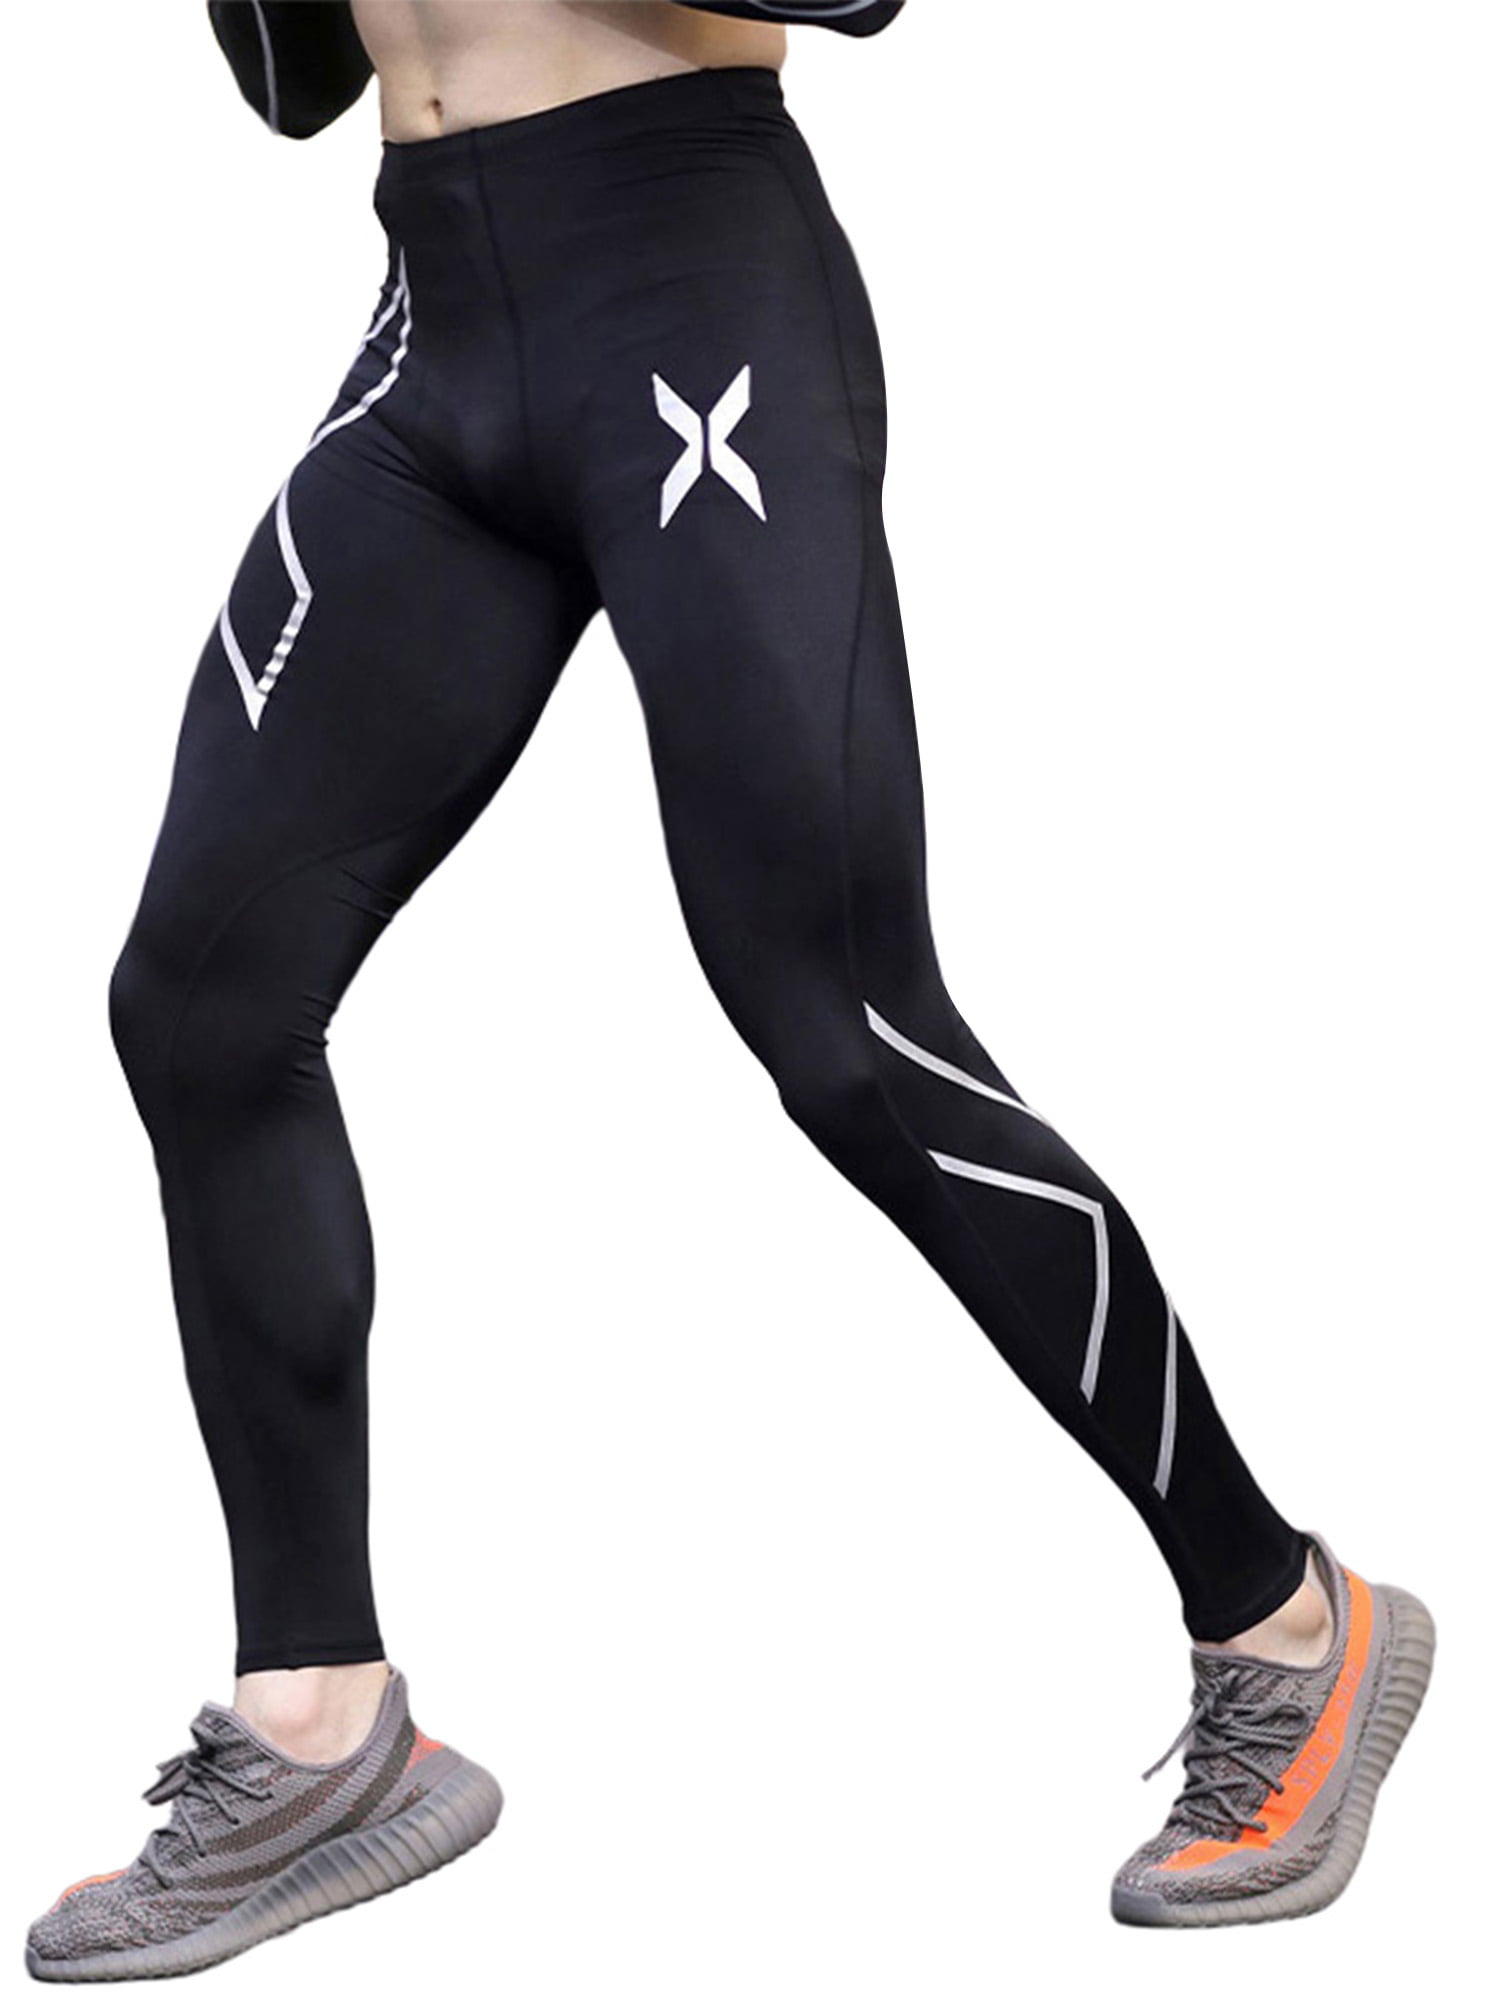 Mens 3/4 Compression Pants Fitness Running Leggings Slim fit Quick-dry Wicking 